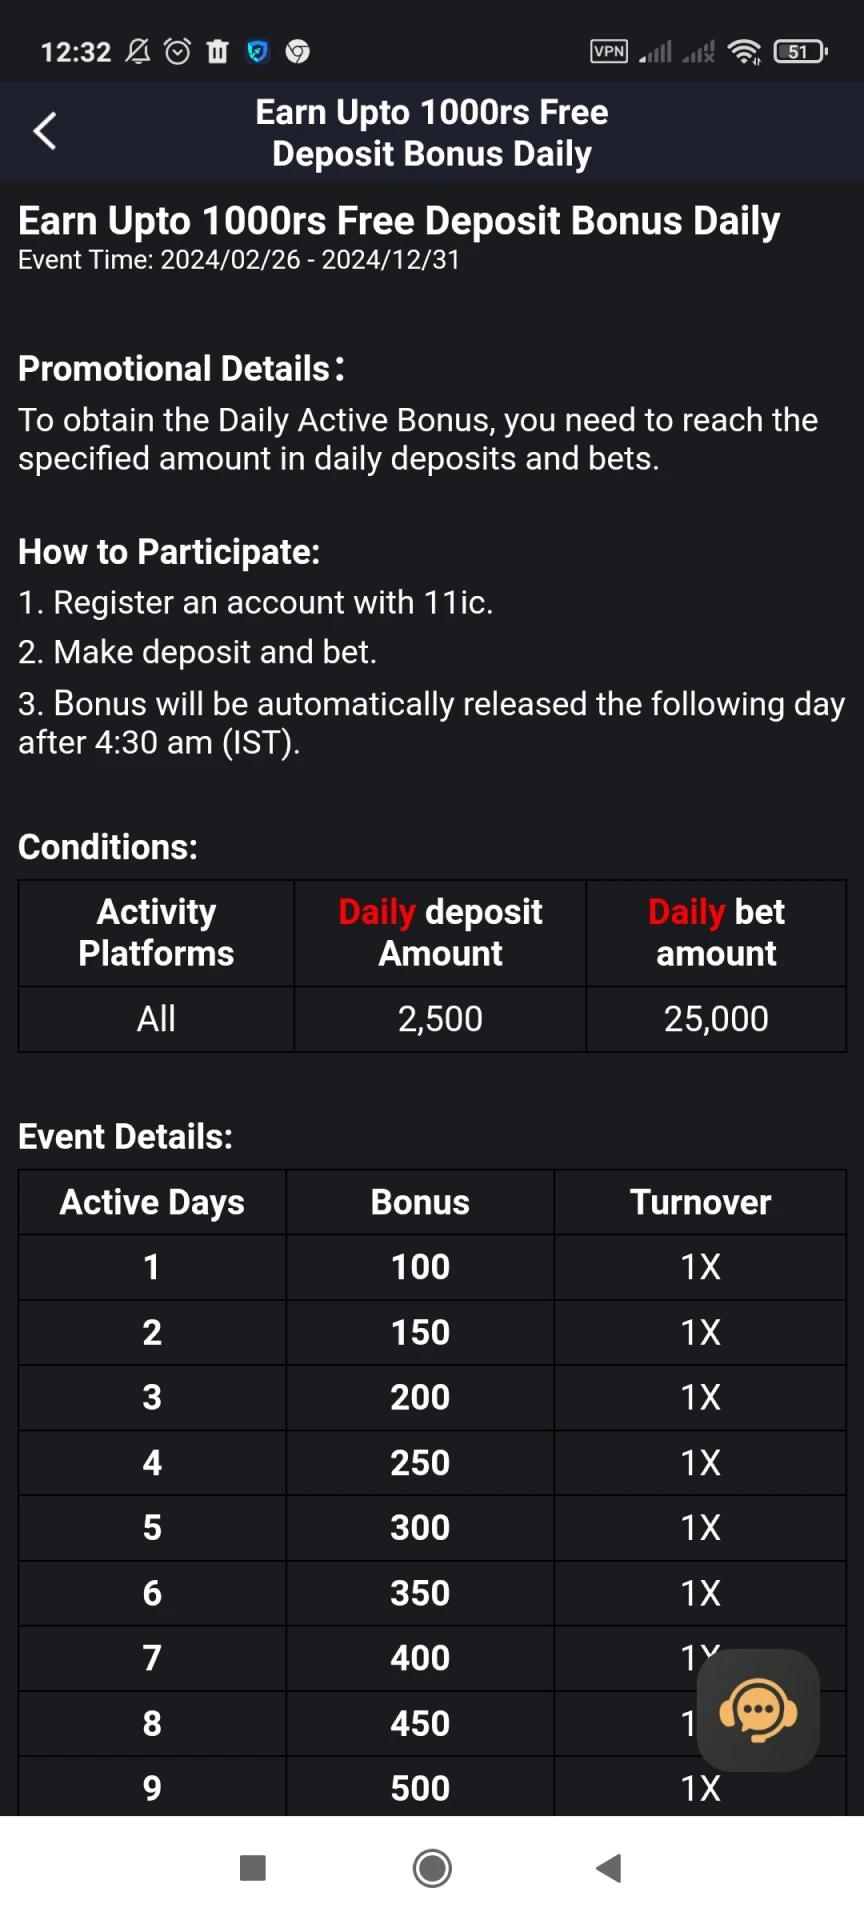 Activate the bonus from 11ic.